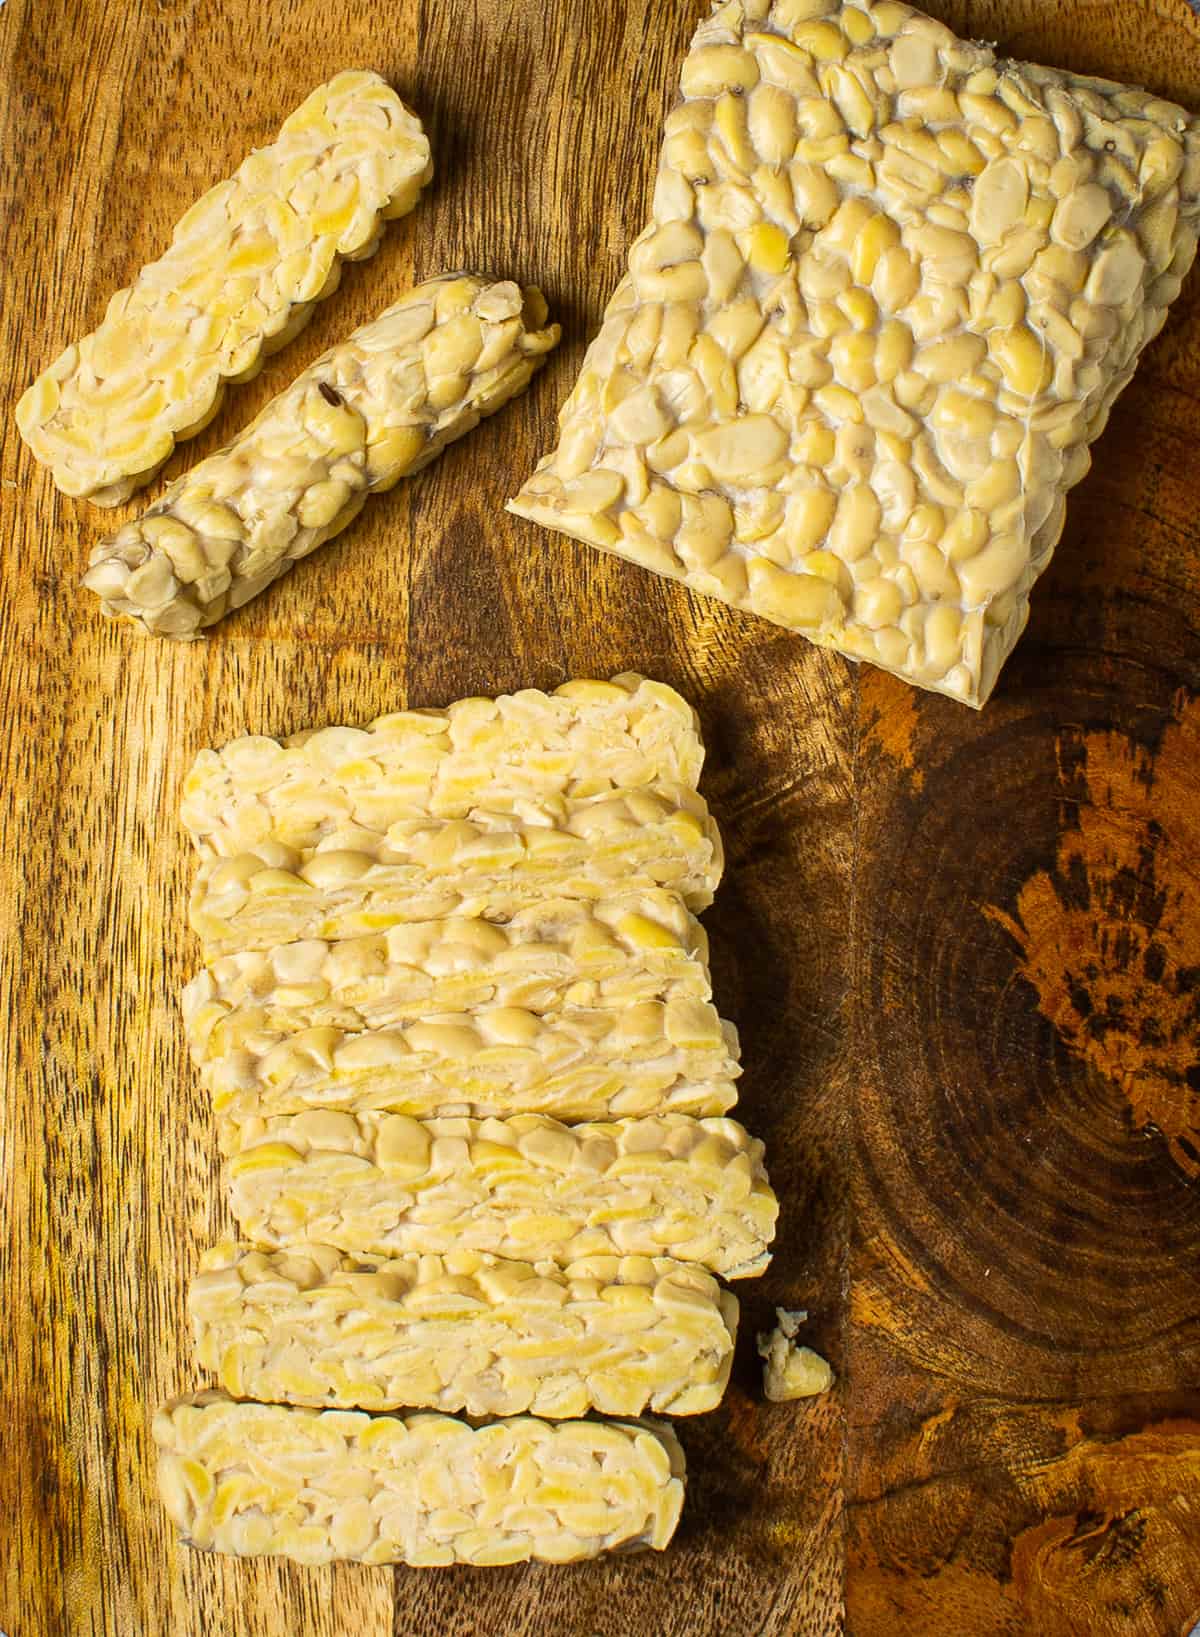 tempeh slices